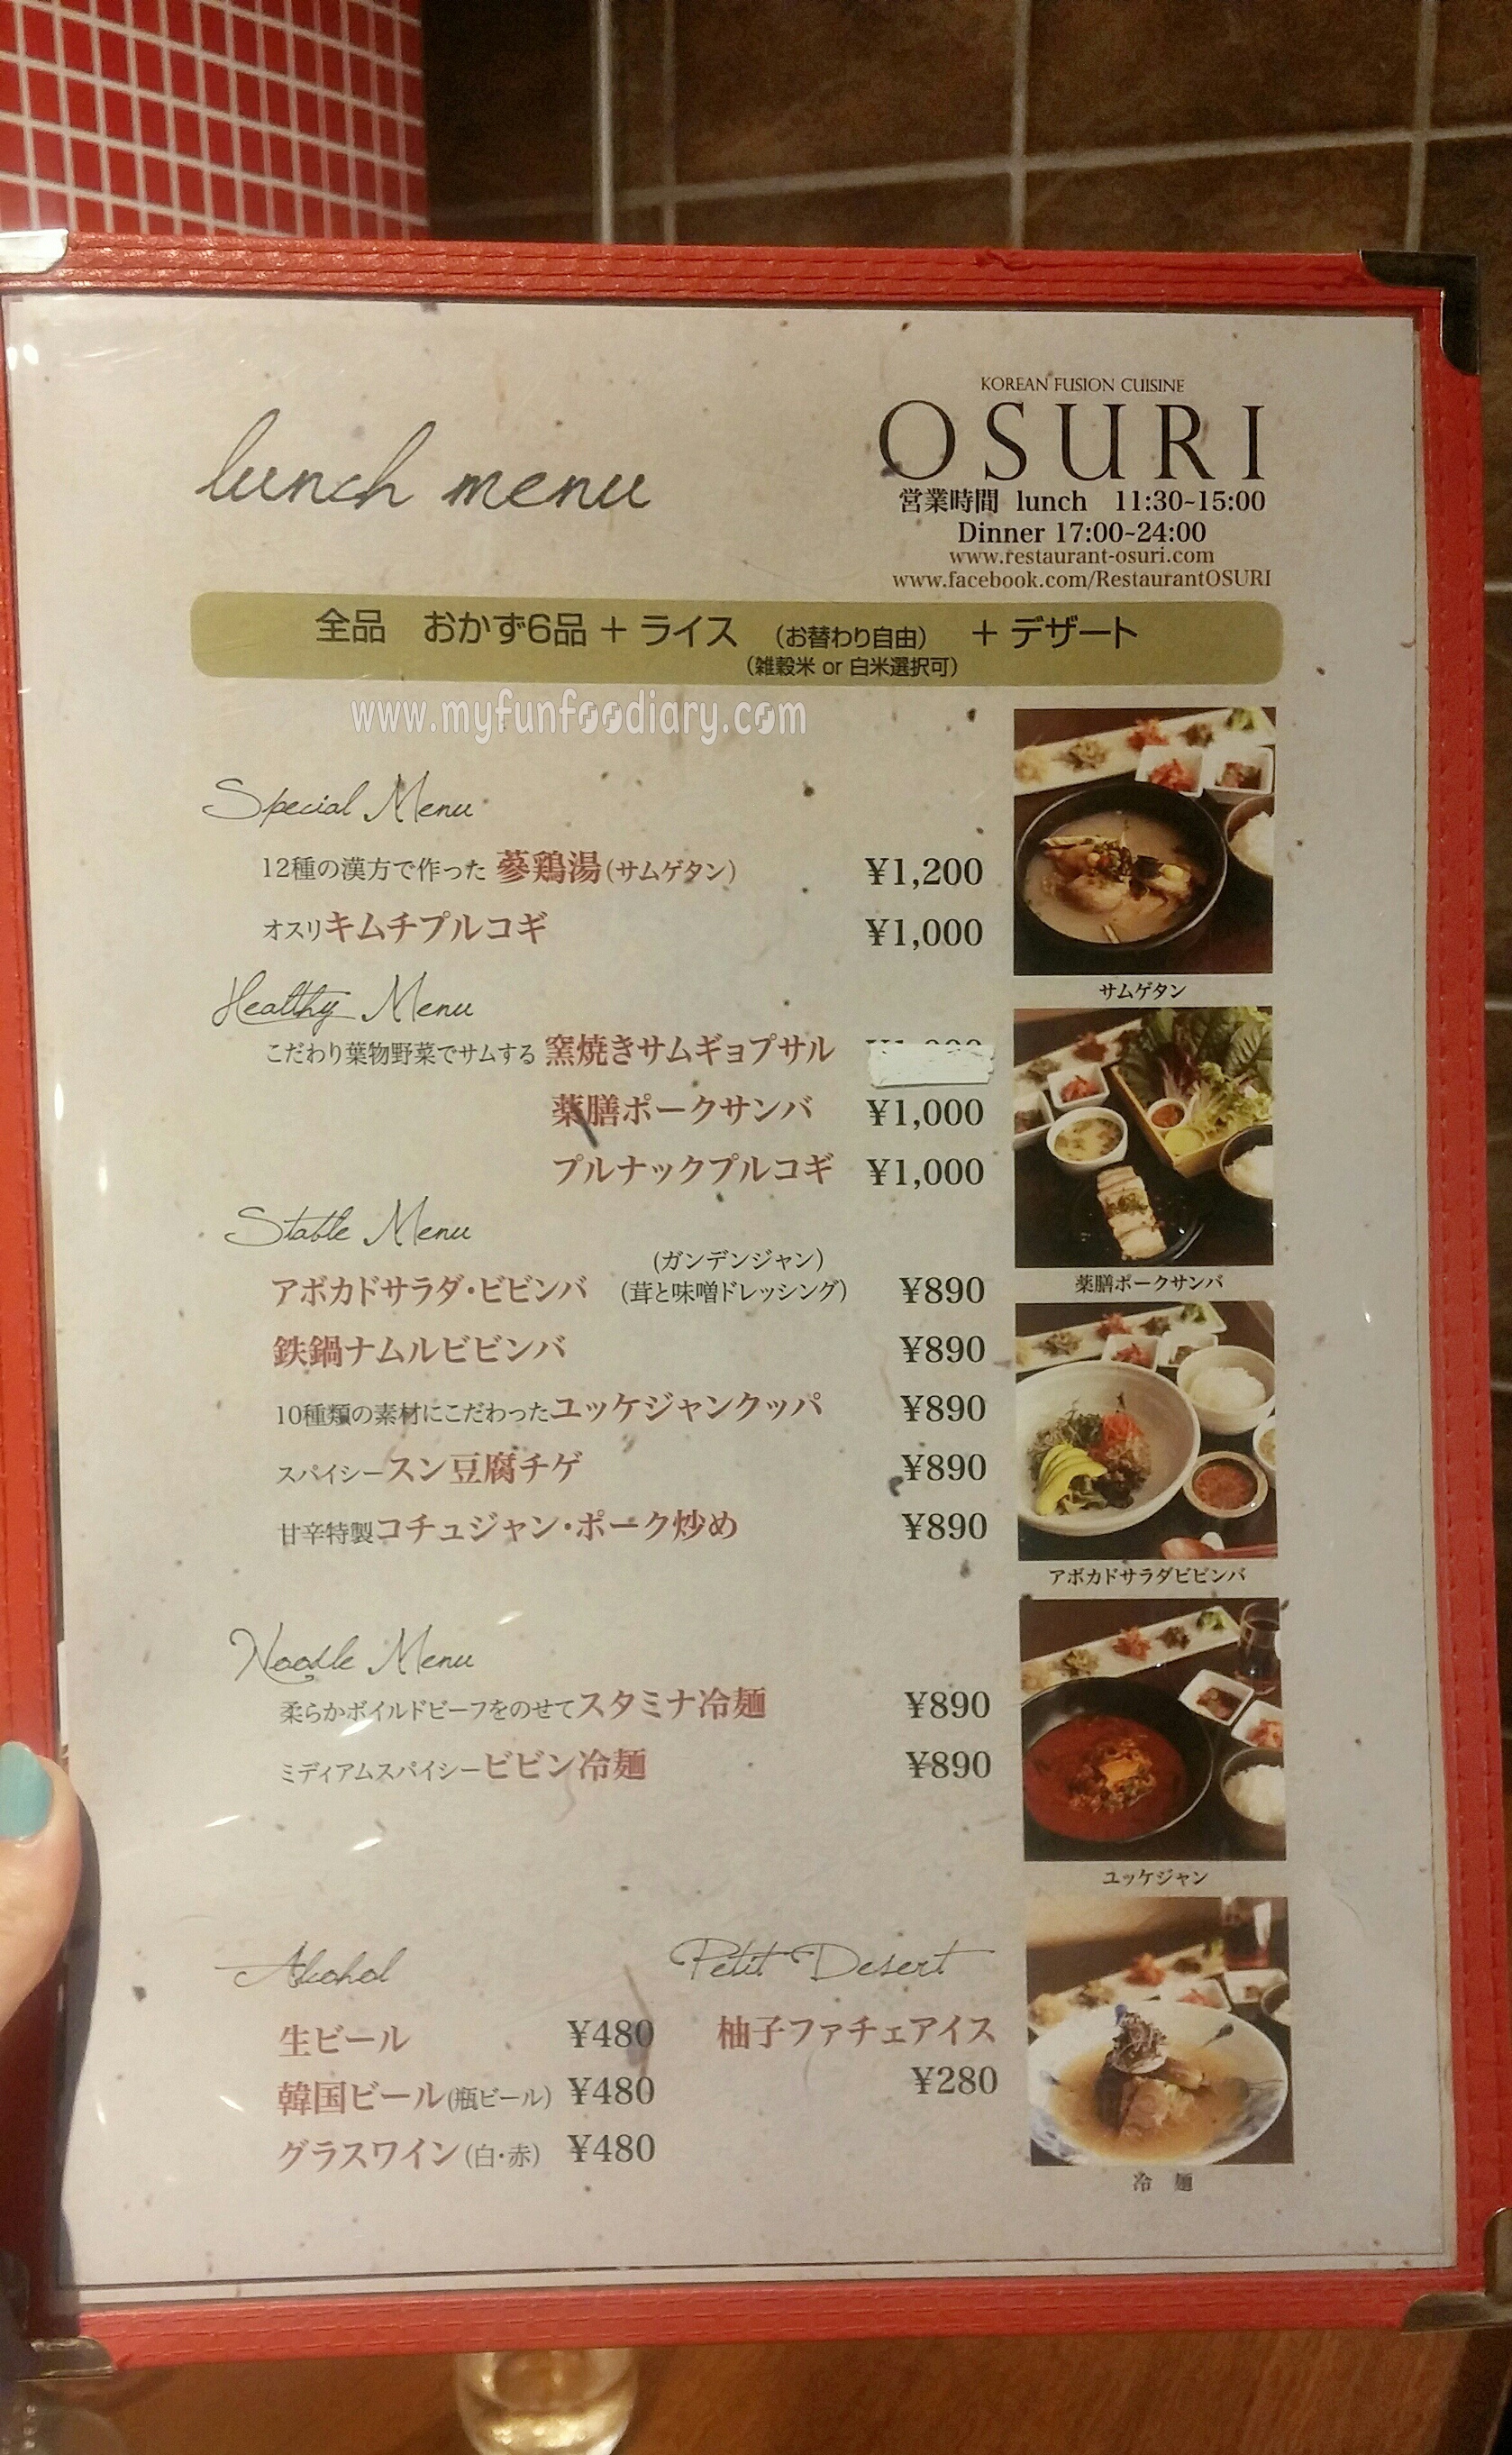 Lunch Menu at OSURI Restaurant in Tokyo Japan by Myfunfoodiary